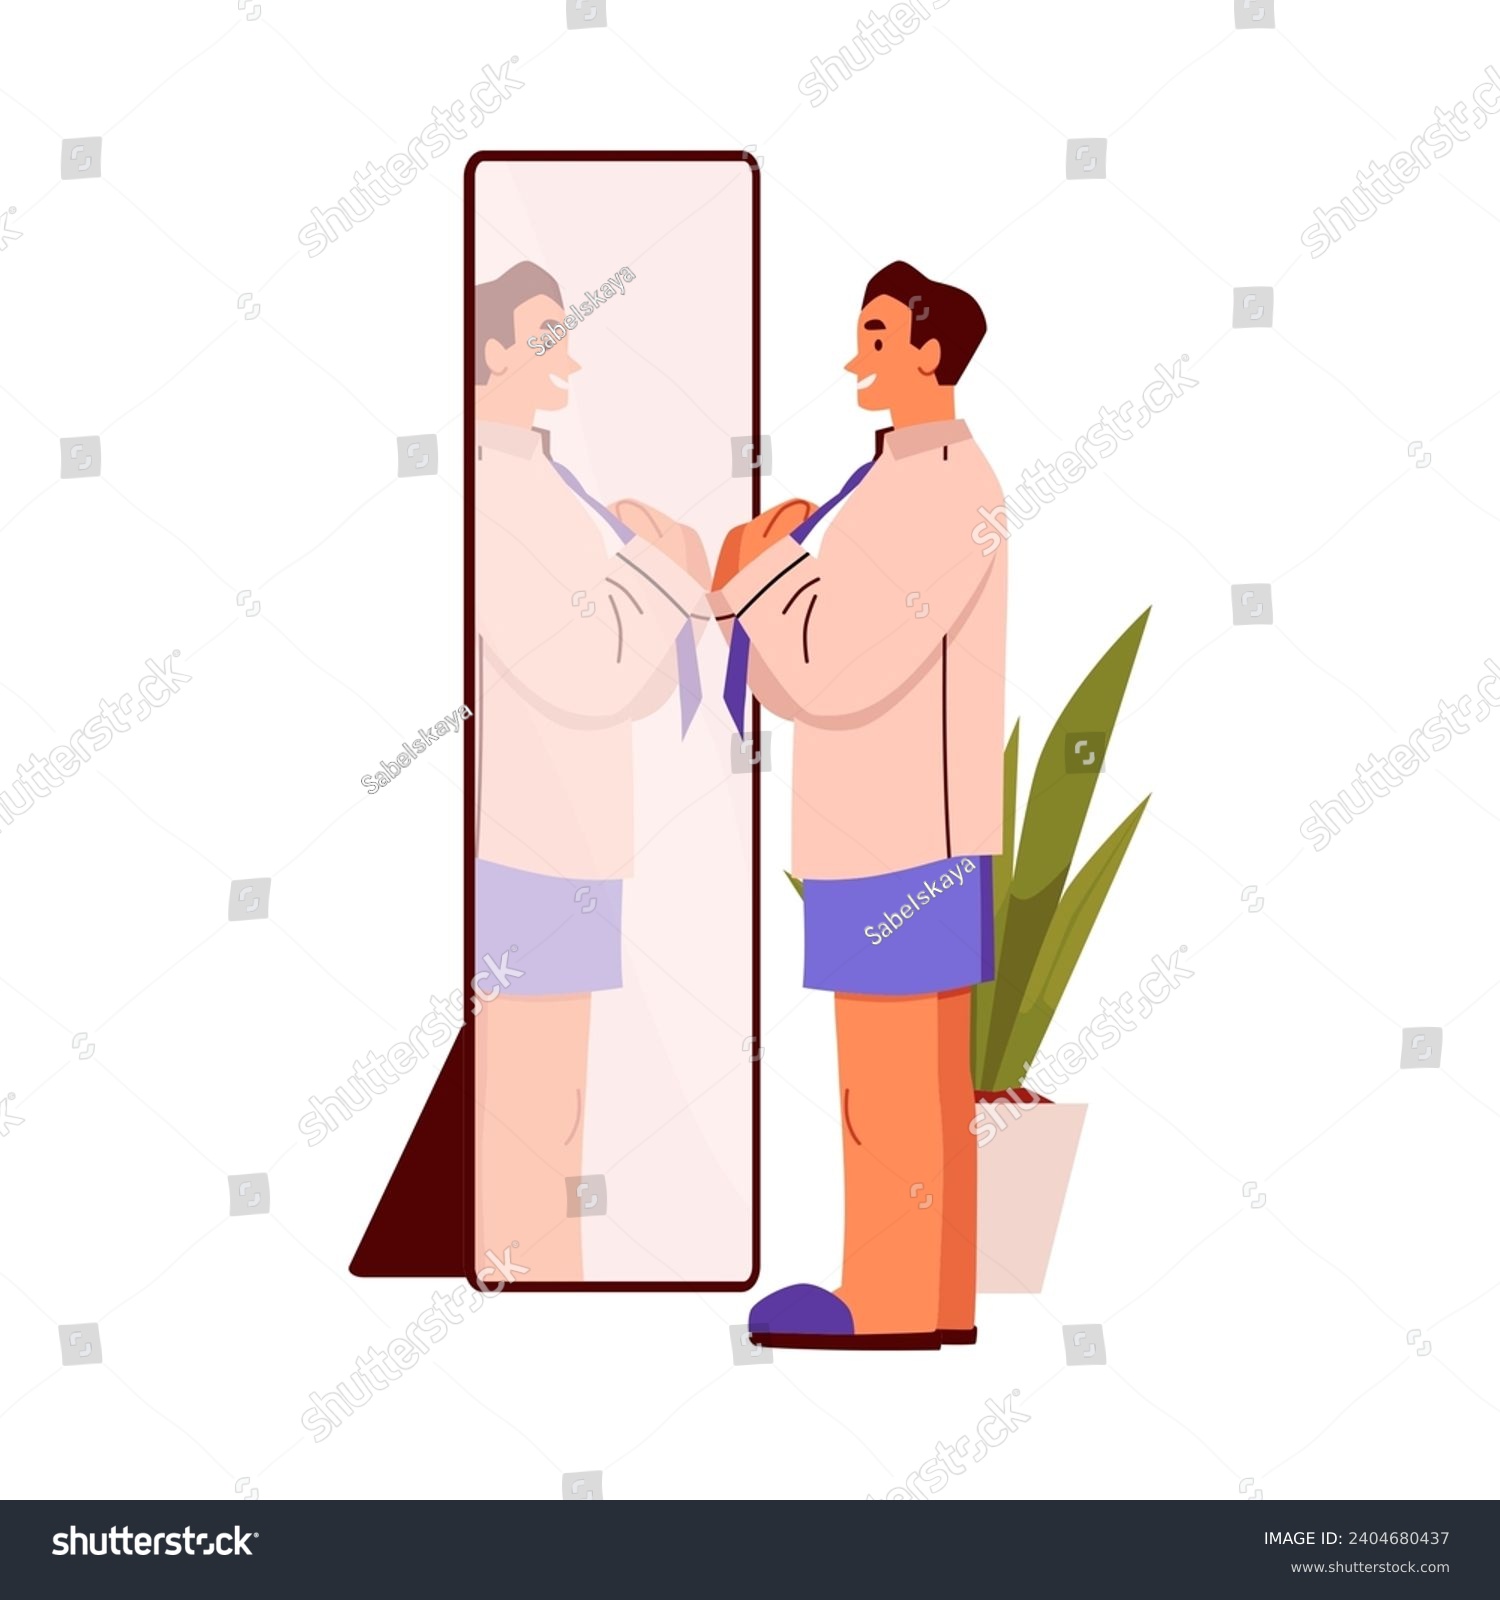 SVG of Man tying a tie stands in front of a mirror, flat cartoon vector illustration isolated on white background. Man gets dressed before work or wedding event. svg